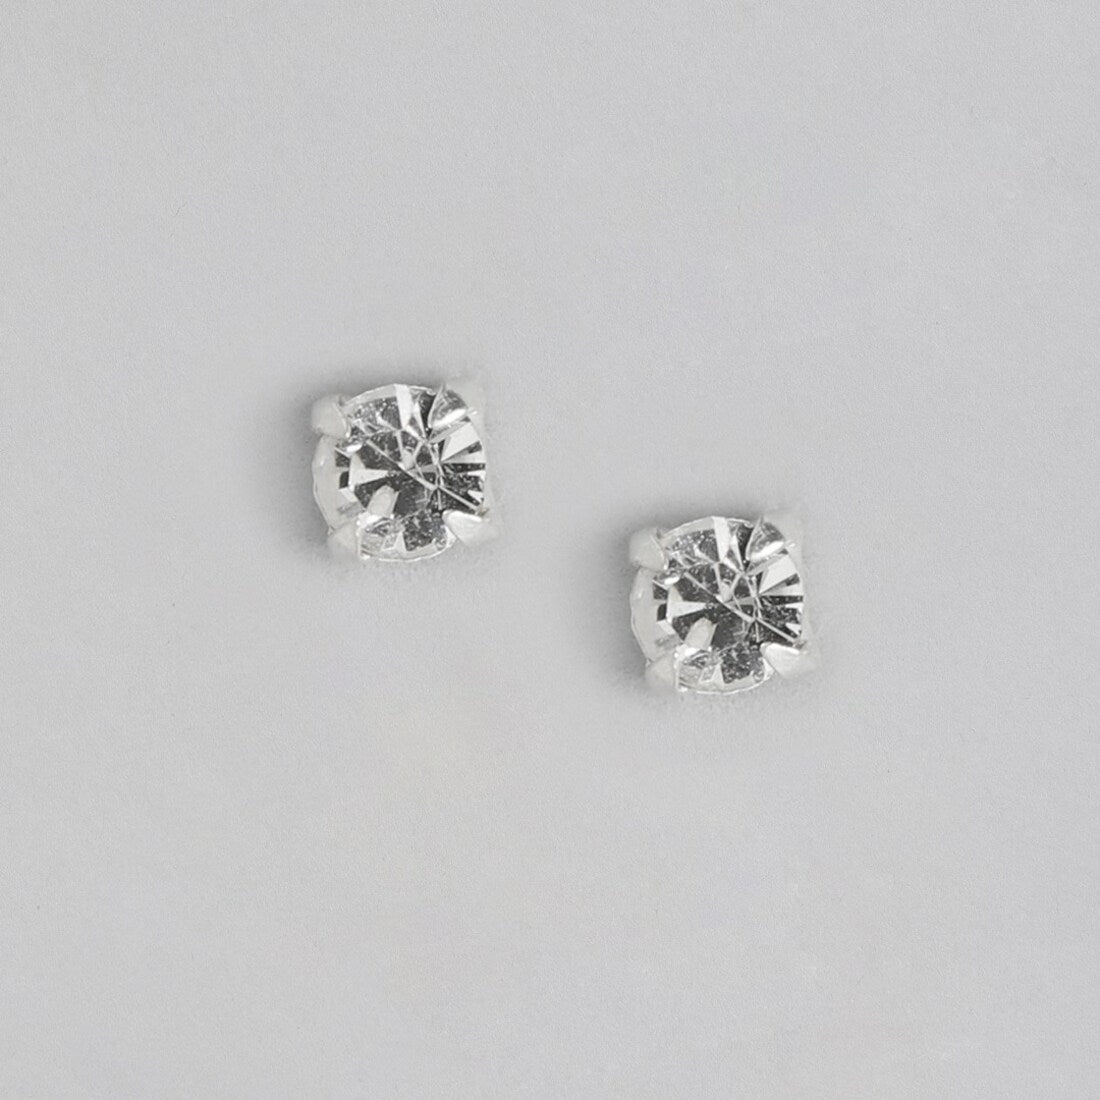 Shimmering Brilliance Rhodium-Plated 925 Sterling Silver Earrings